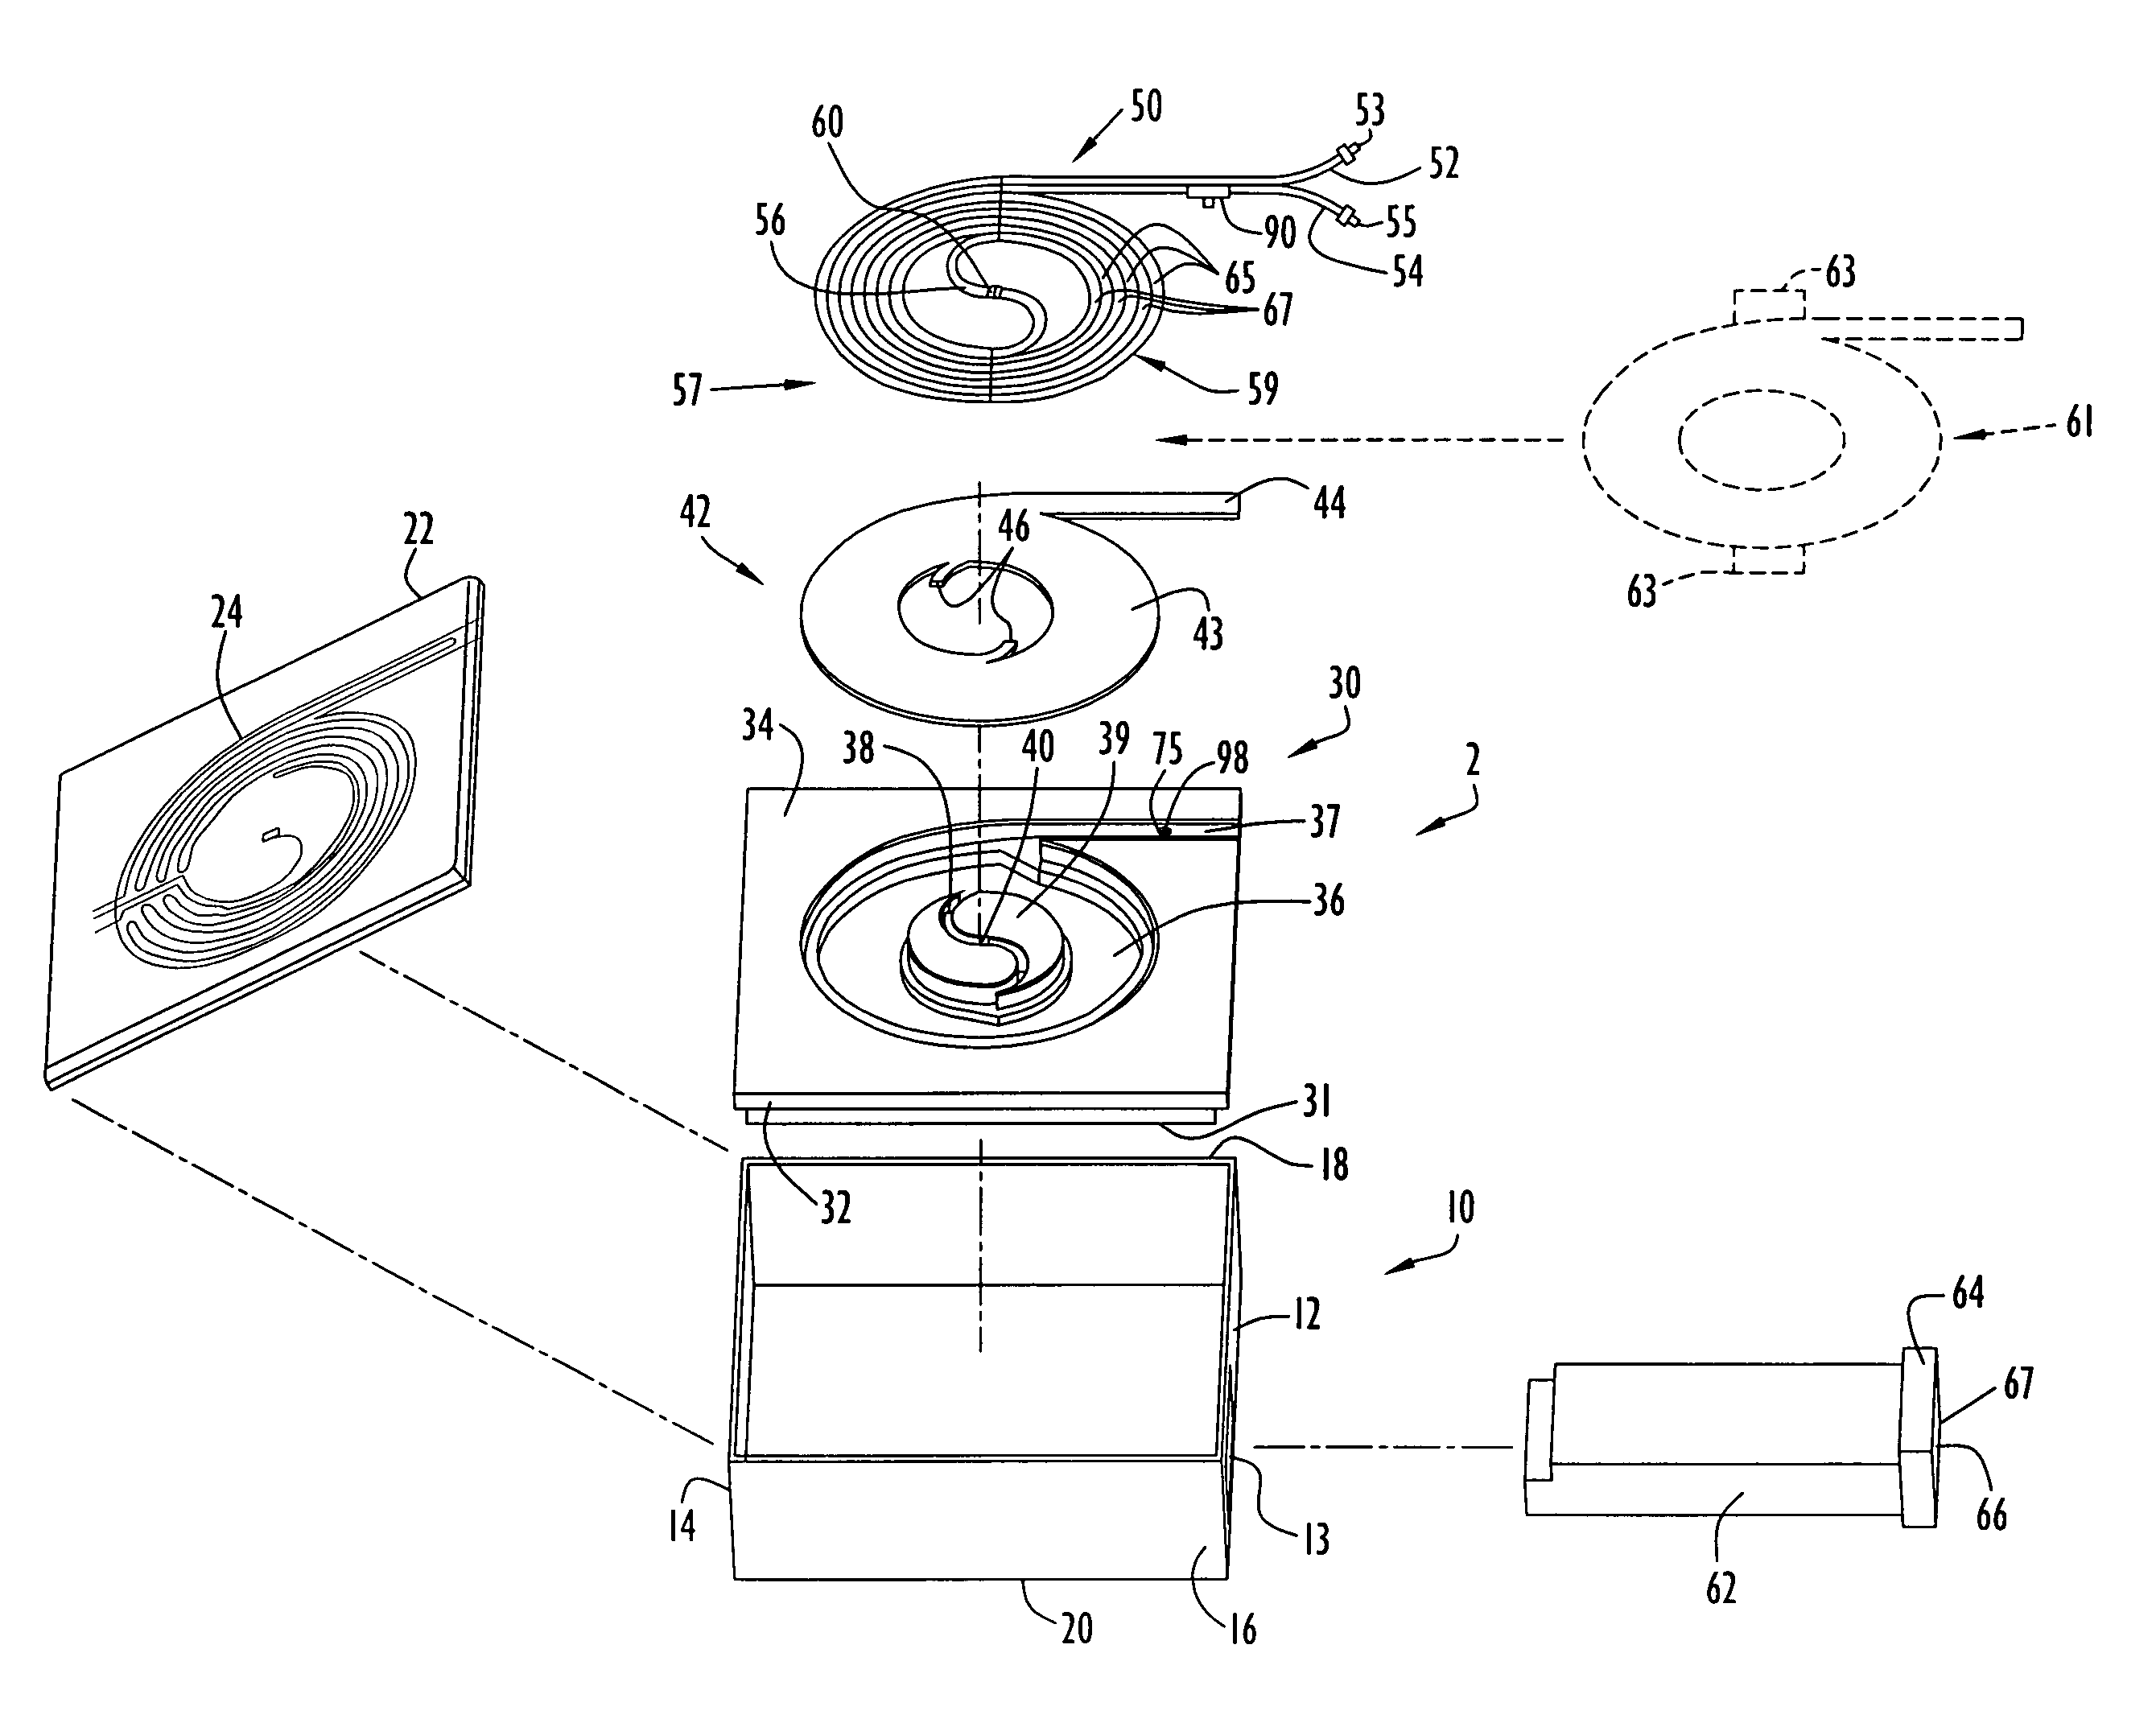 Method and apparatus for heating solutions within intravenous lines to desired temperatures during infusion